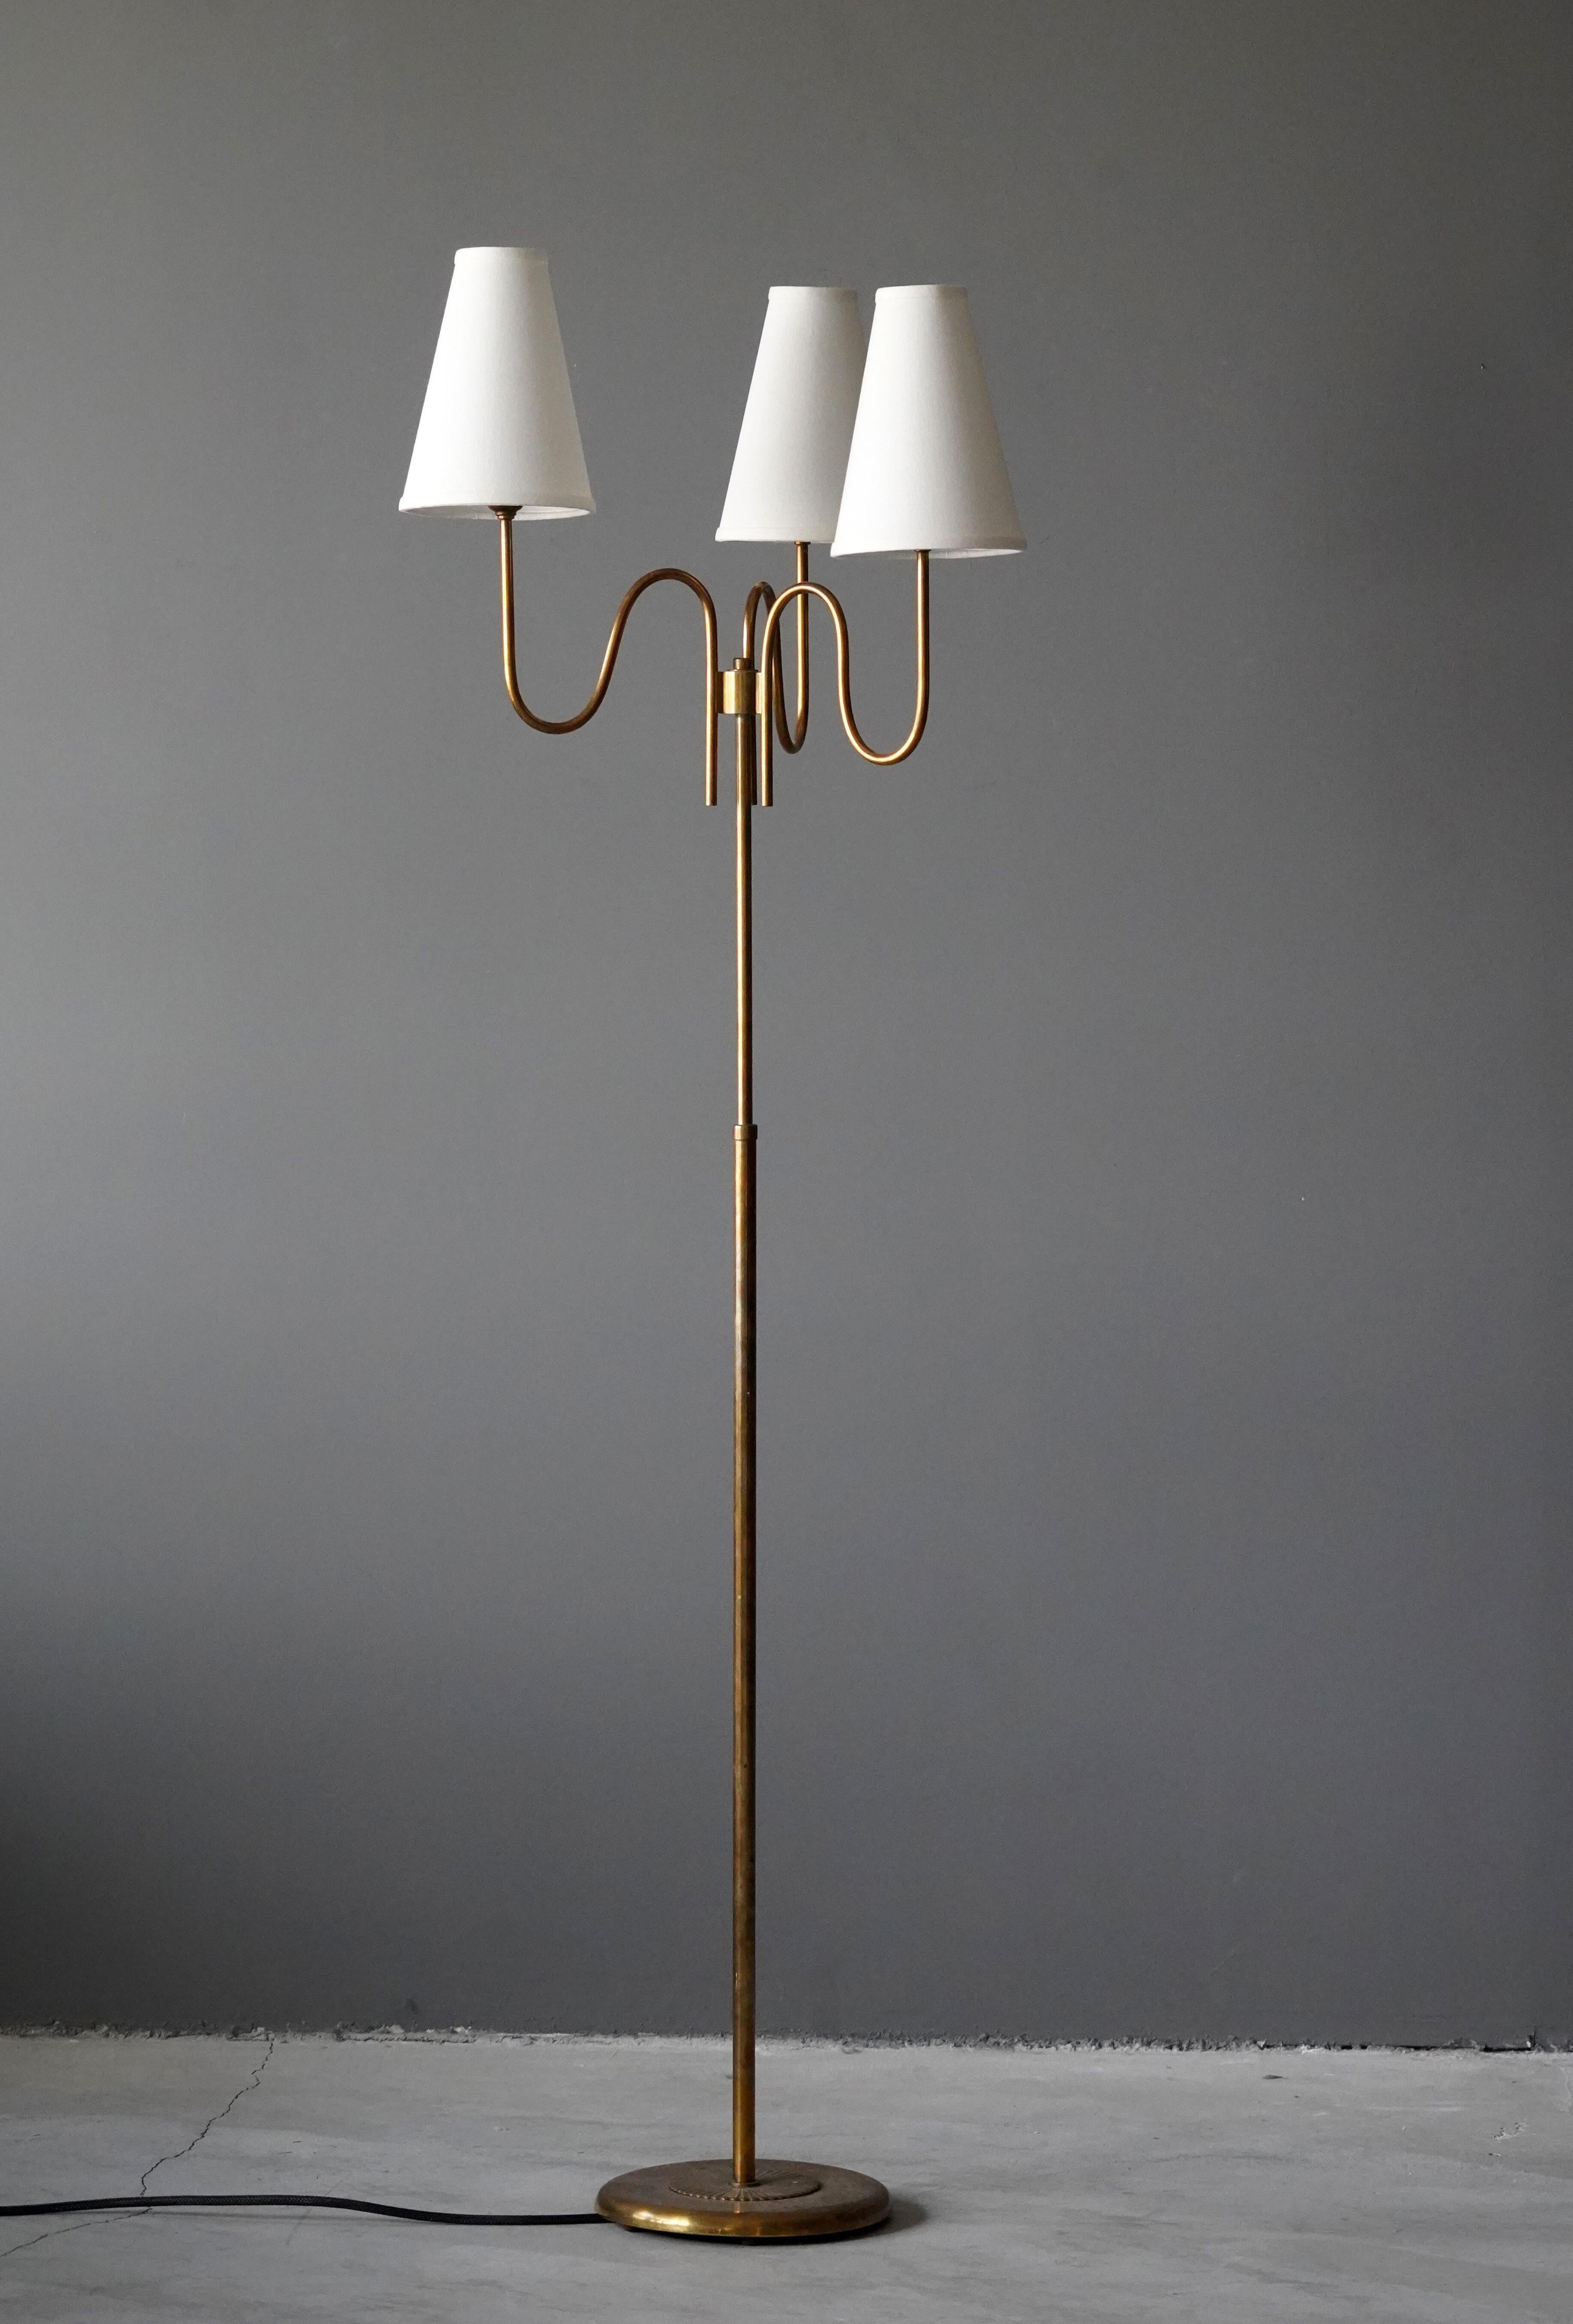 A three-armed floor lamp. By an unknown Swedish designer and maker. In brass. 

Adjustable height, measured as illustrated.

Other designers working in the organic style include Jean Royere, Alvar Aalto, Paavo Tynell, Josef Frank, and Serge